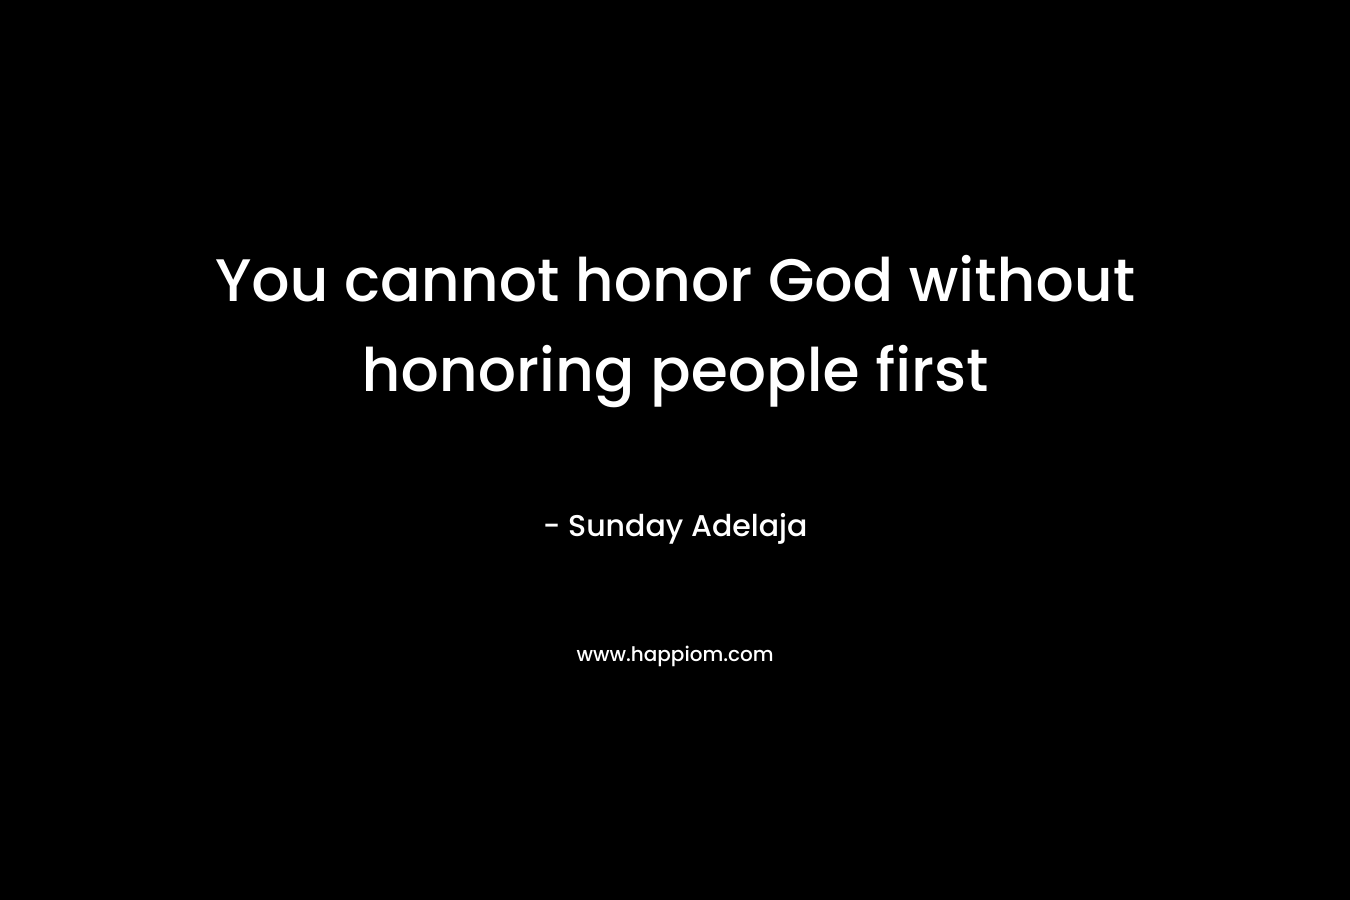 You cannot honor God without honoring people first